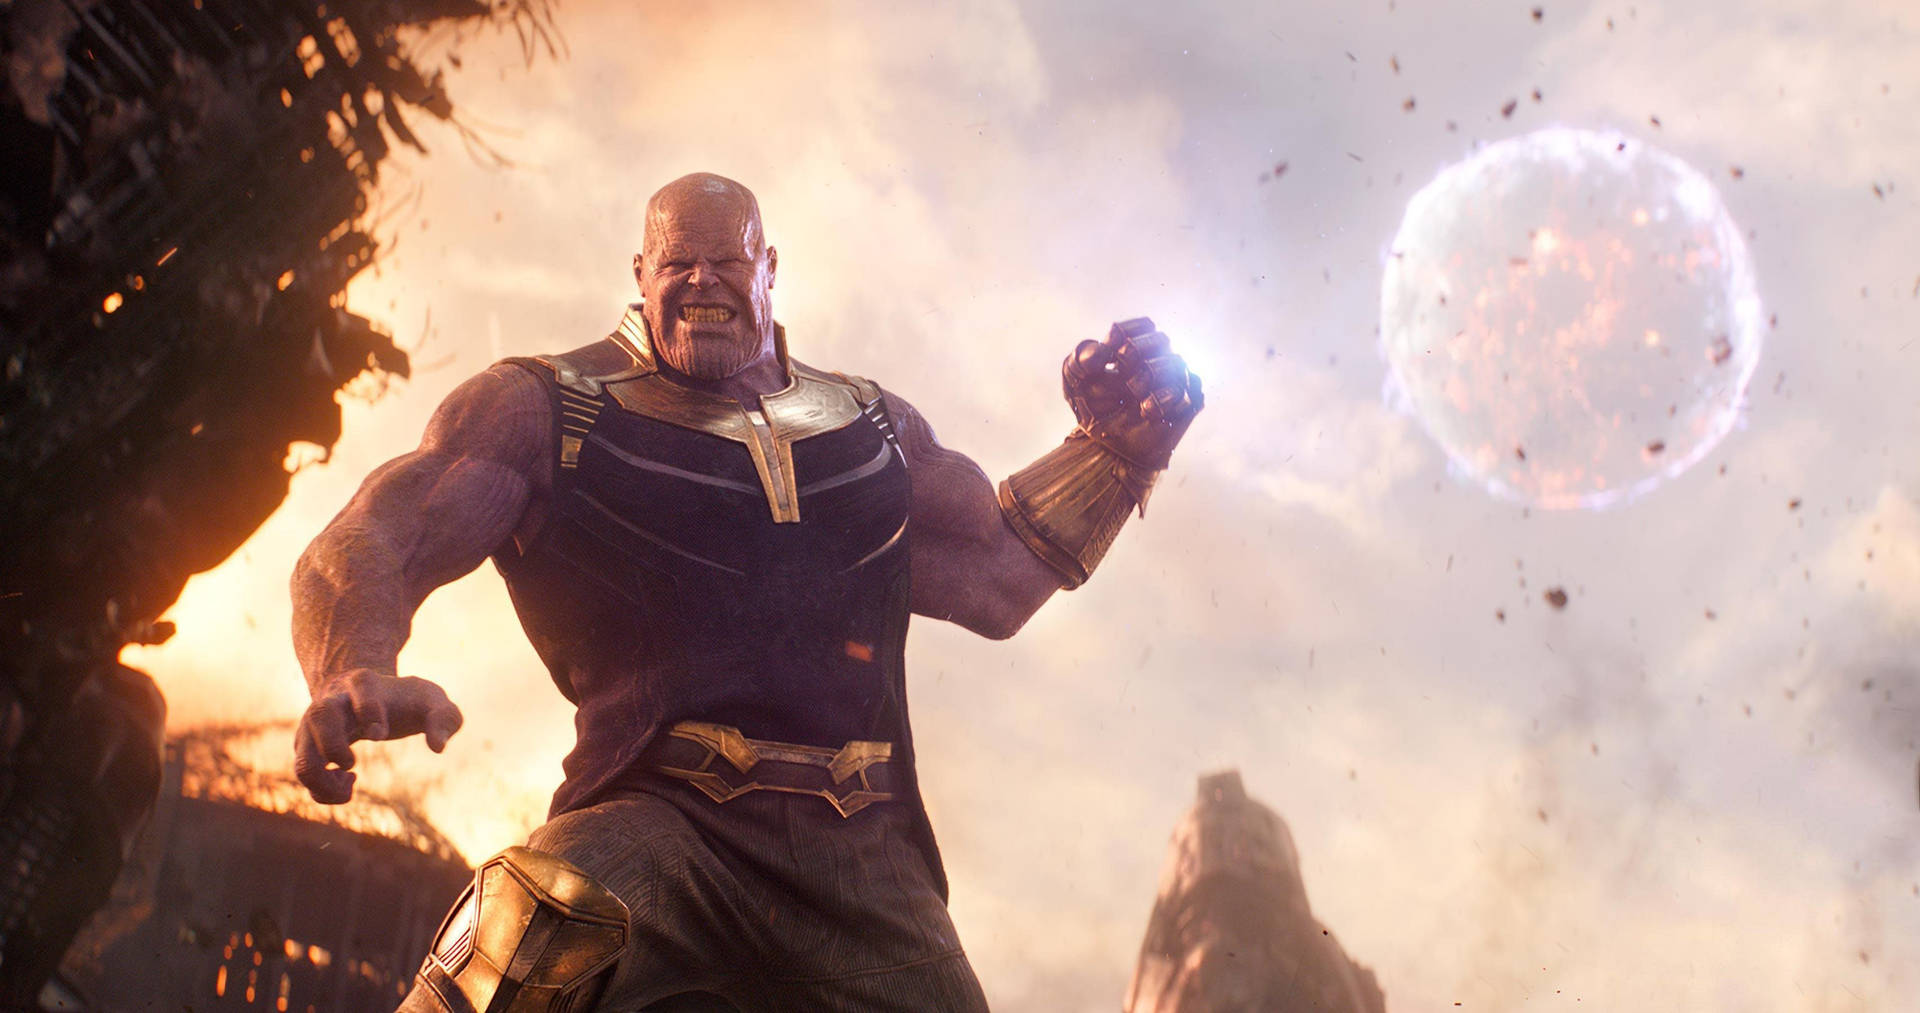 An enraged Thanos holds the Infinity Gauntlet. Wallpaper